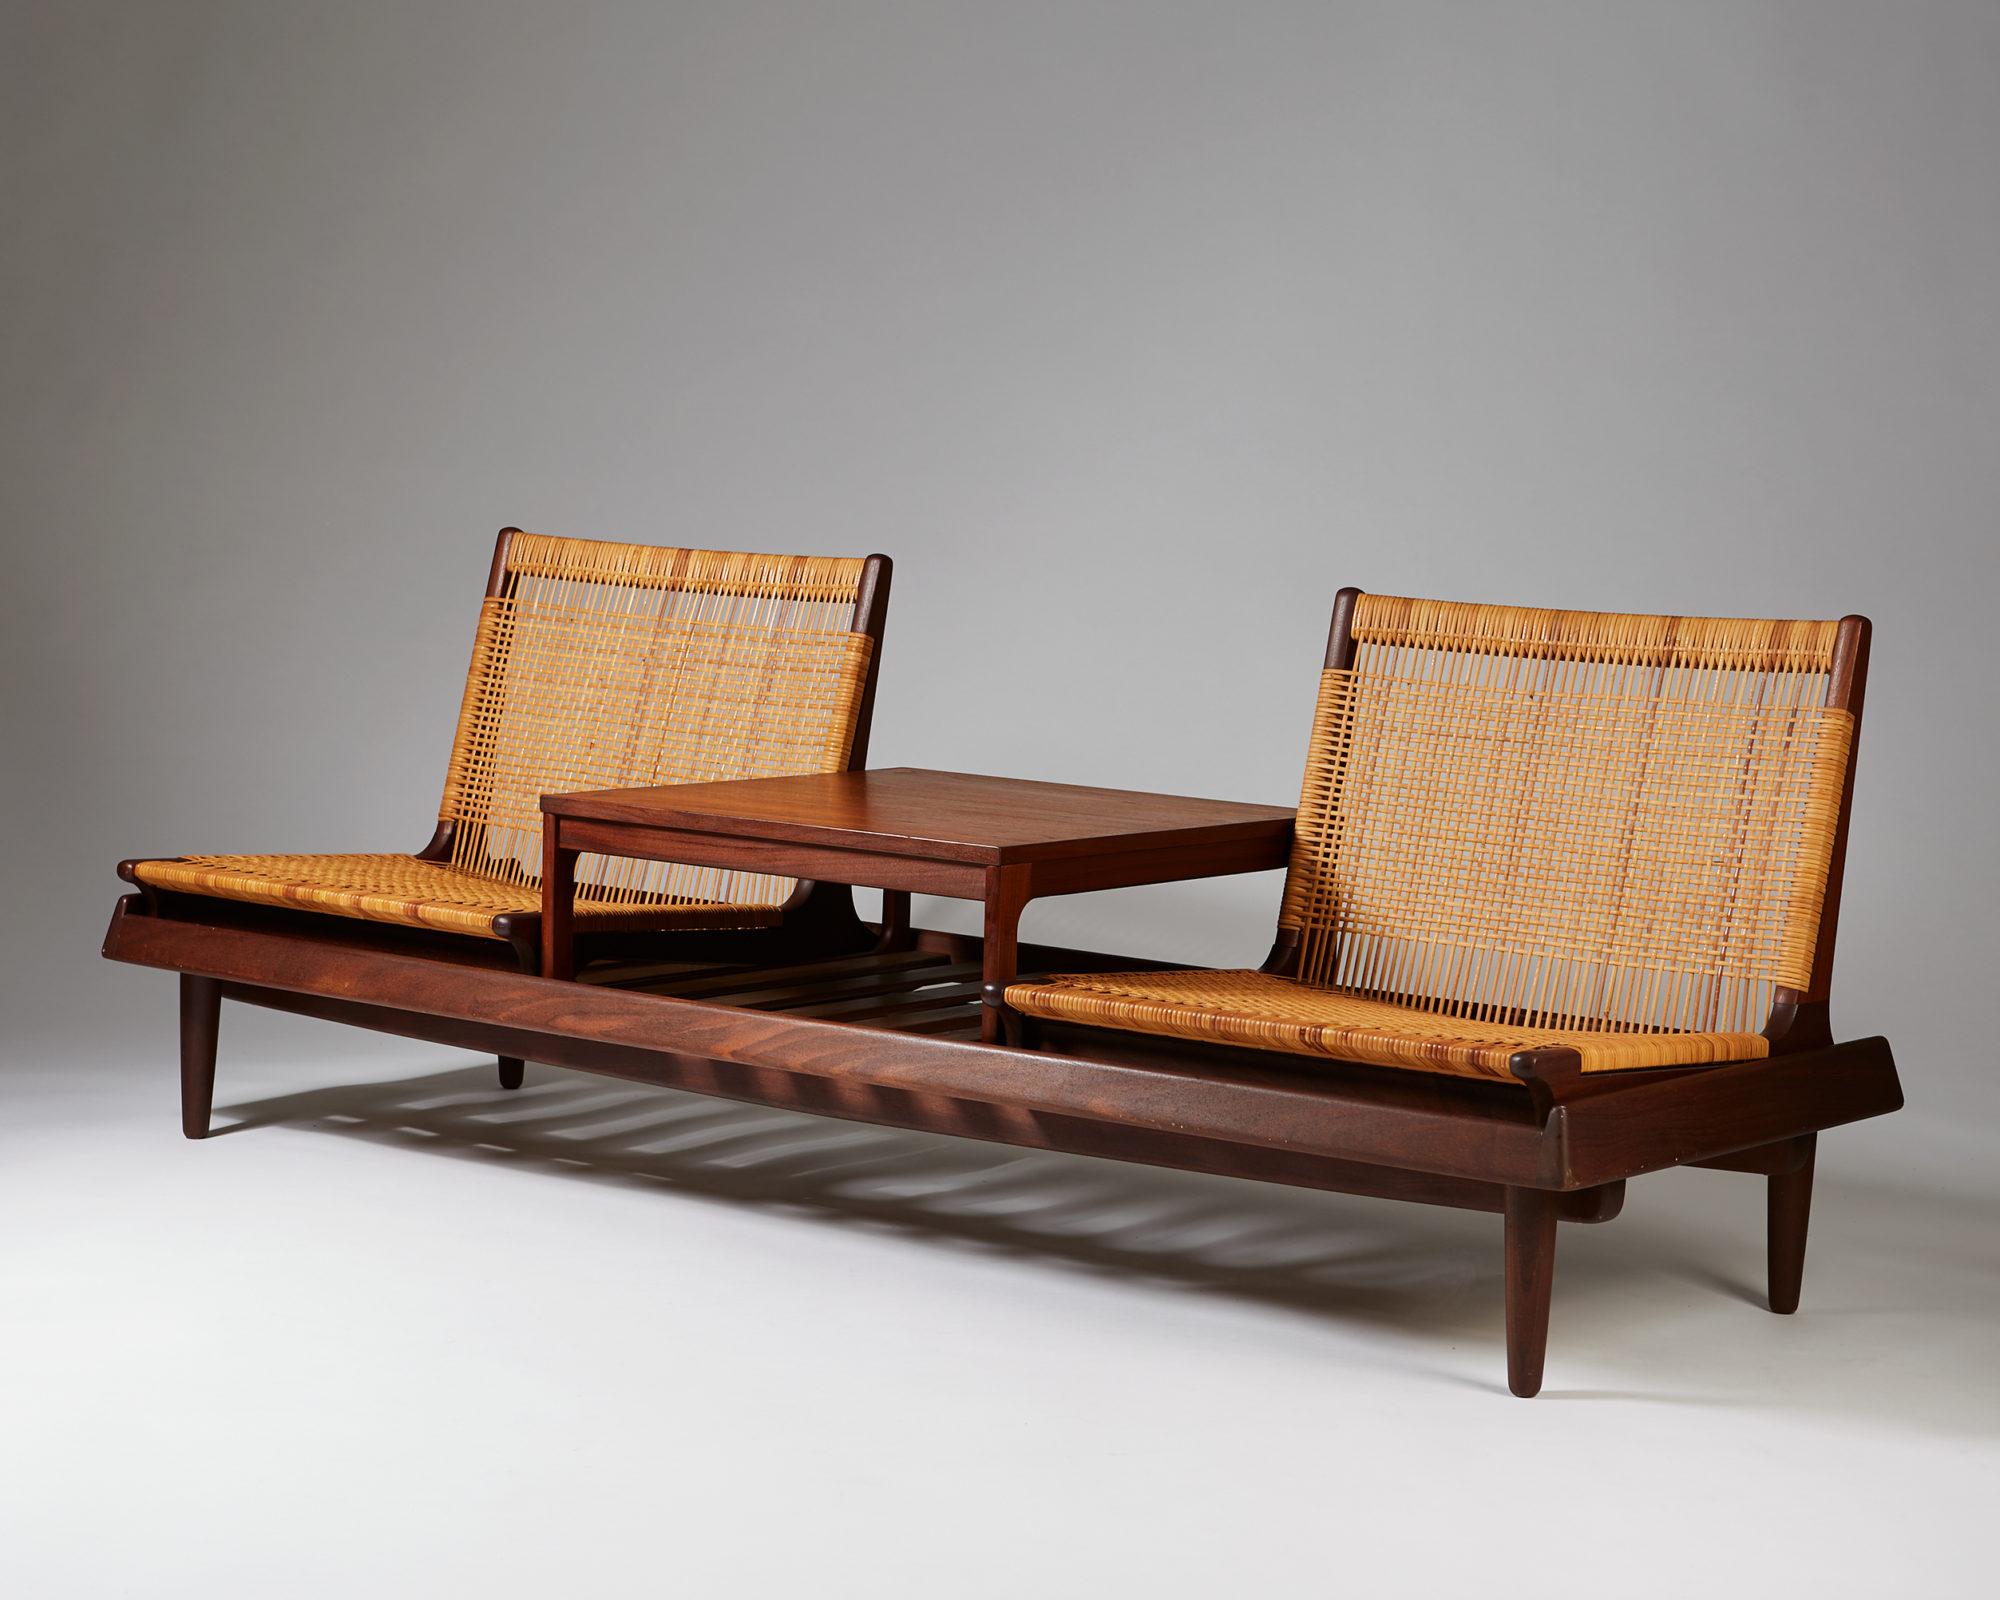 Teak and wicker.
Model used in the Case Study House #20, known as the Bass House, completed in 1958.